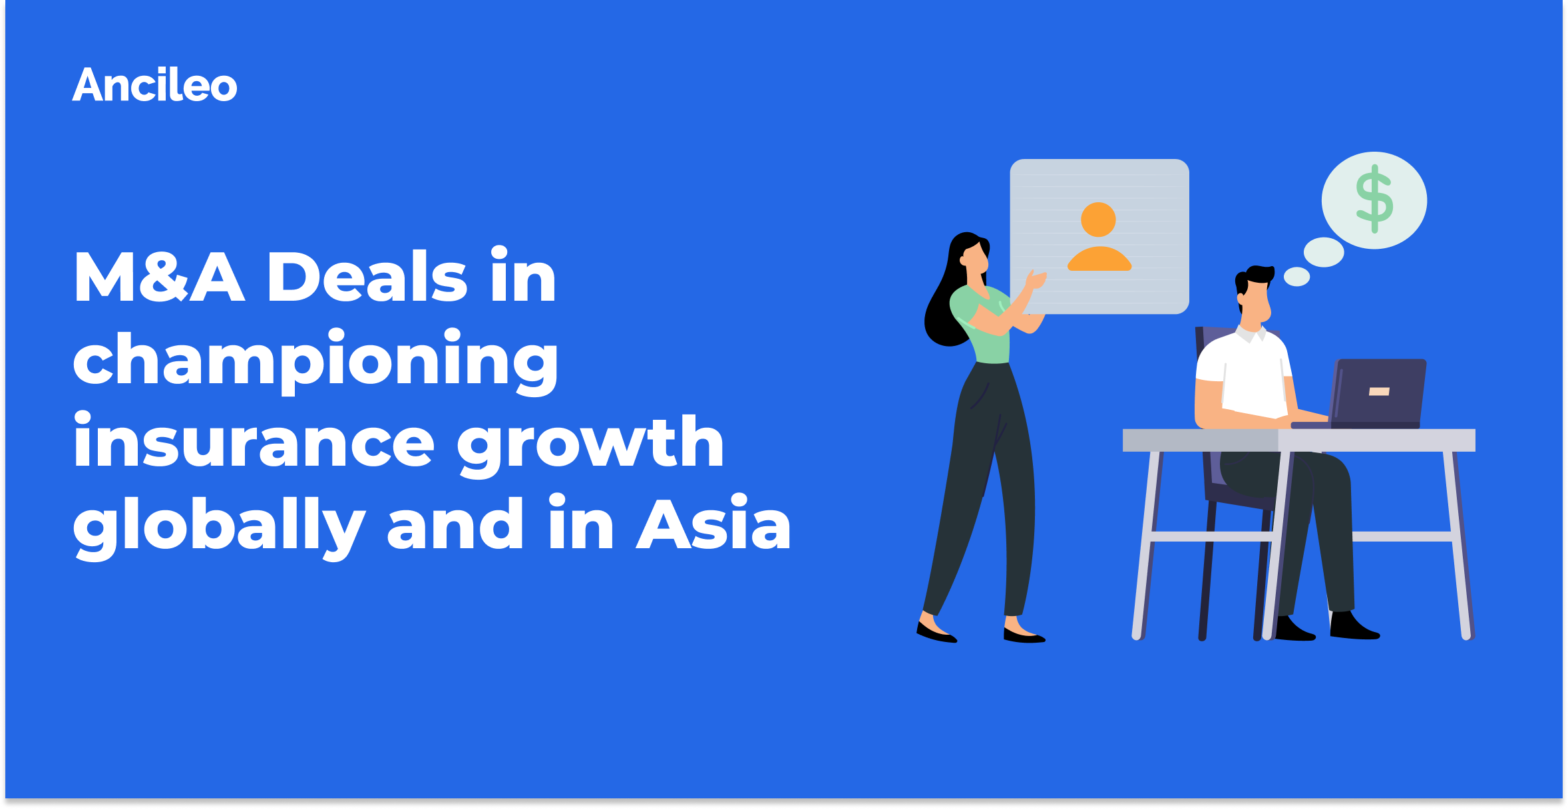 M&A Deals in championing insurance growth globally and in Asia